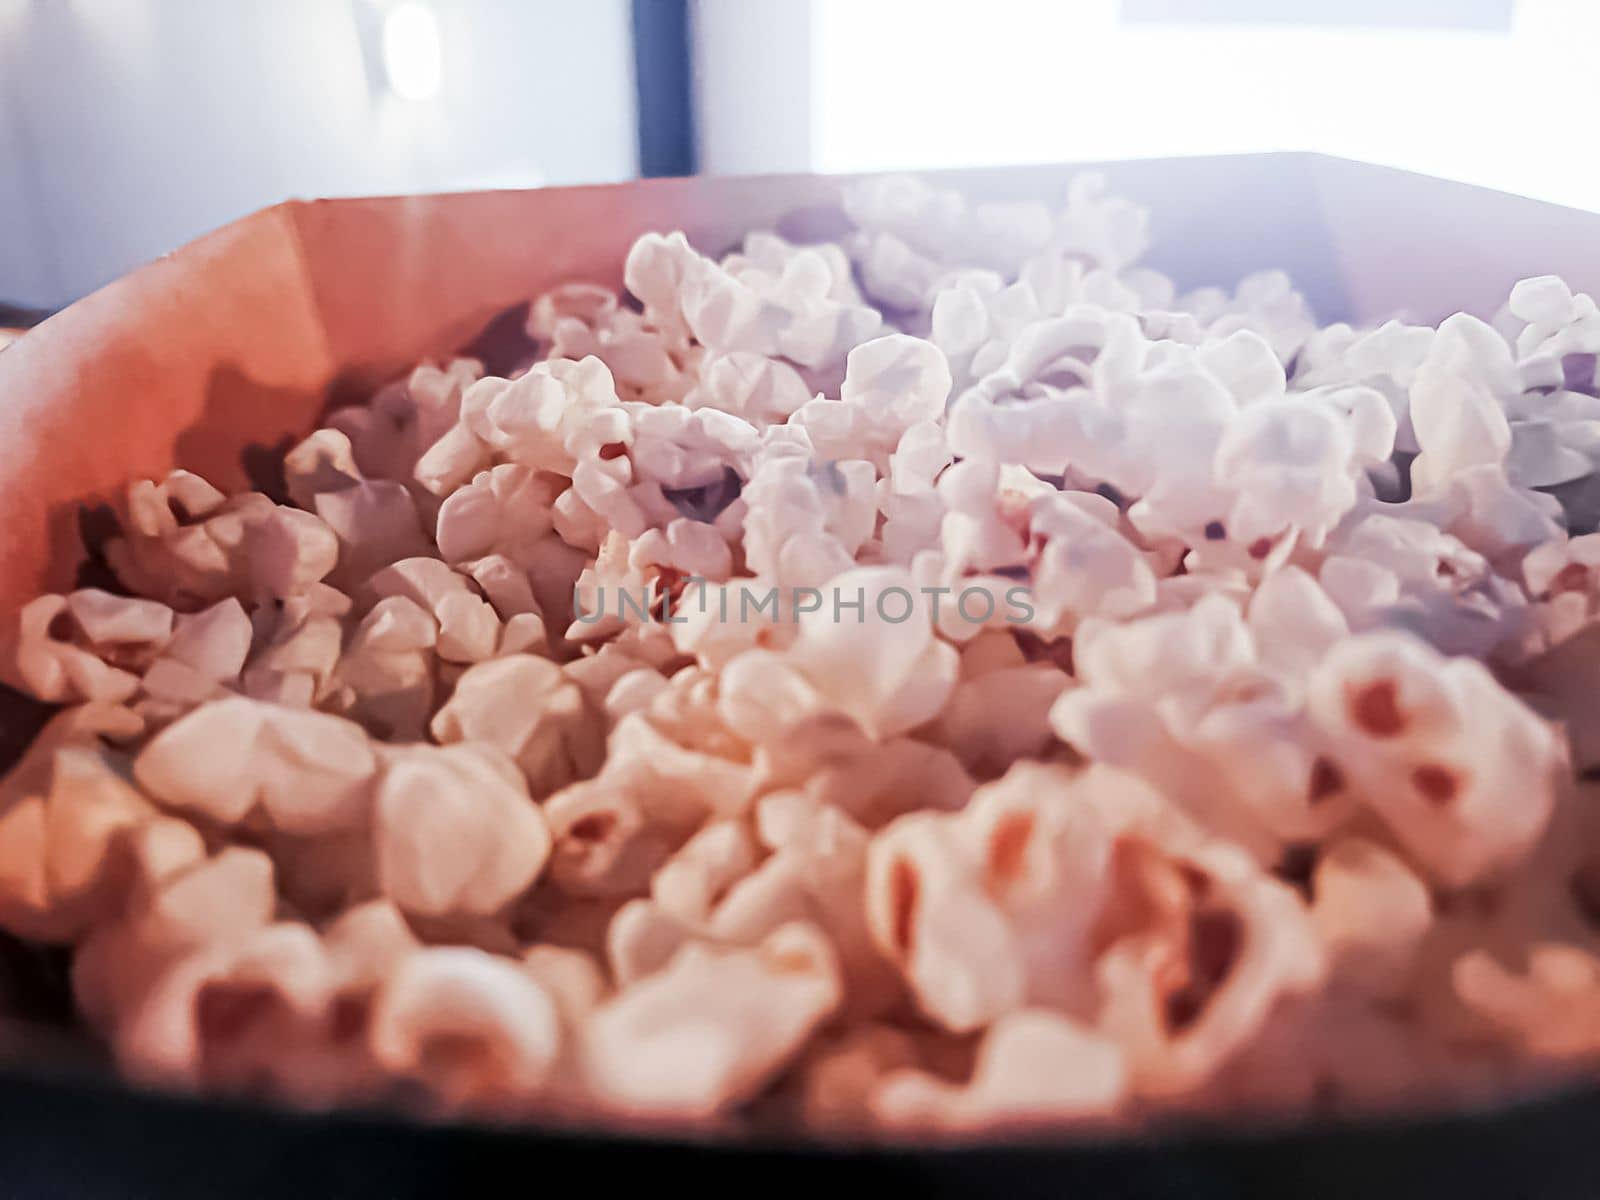 Cinema and entertainment, popcorn box in the movie theatre for tv show streaming service and film industry production branding